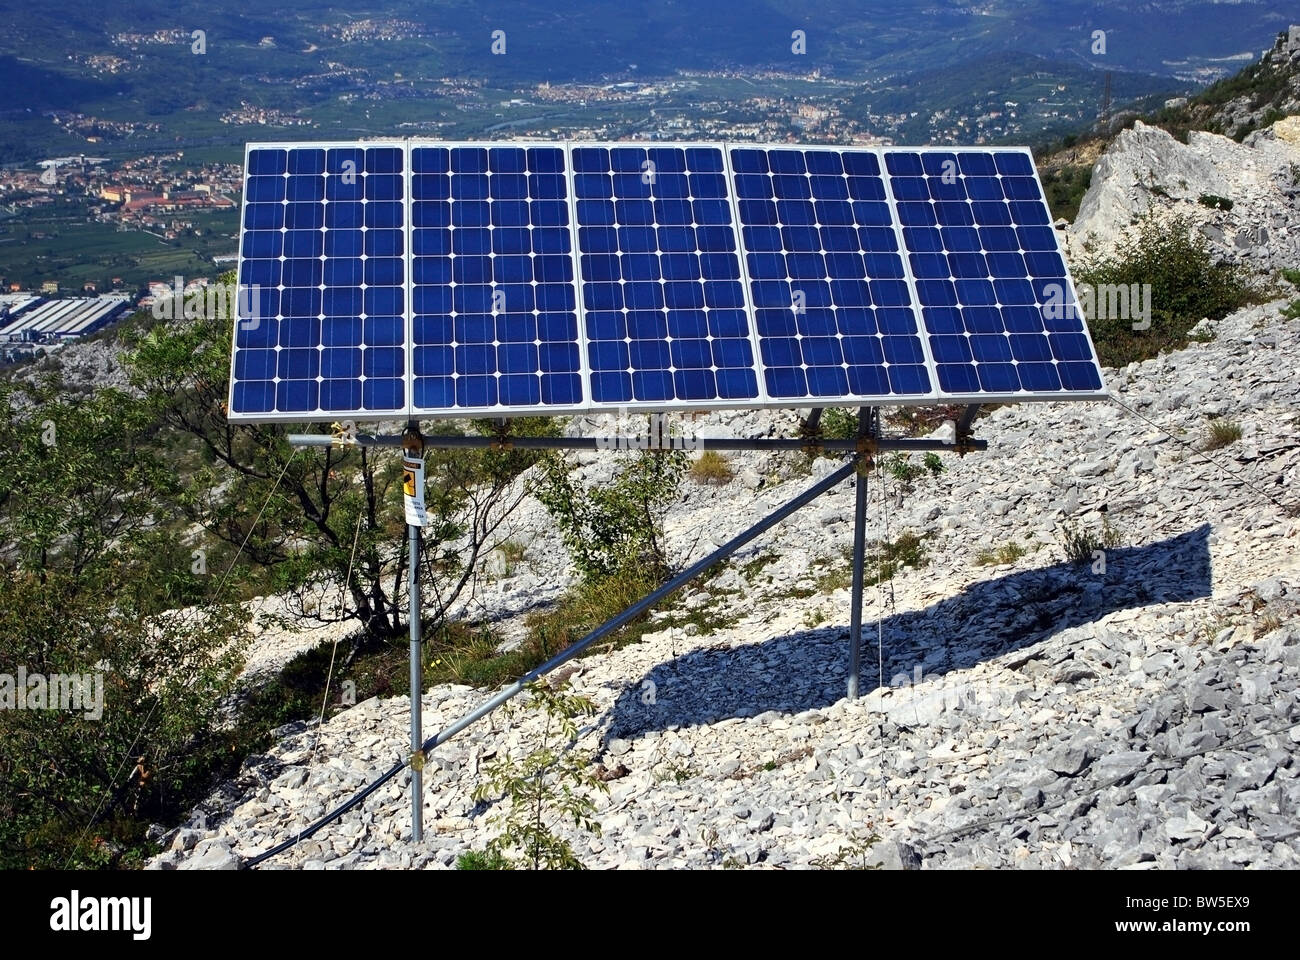 solar panel for electricity production in the high mountains Stock Photo